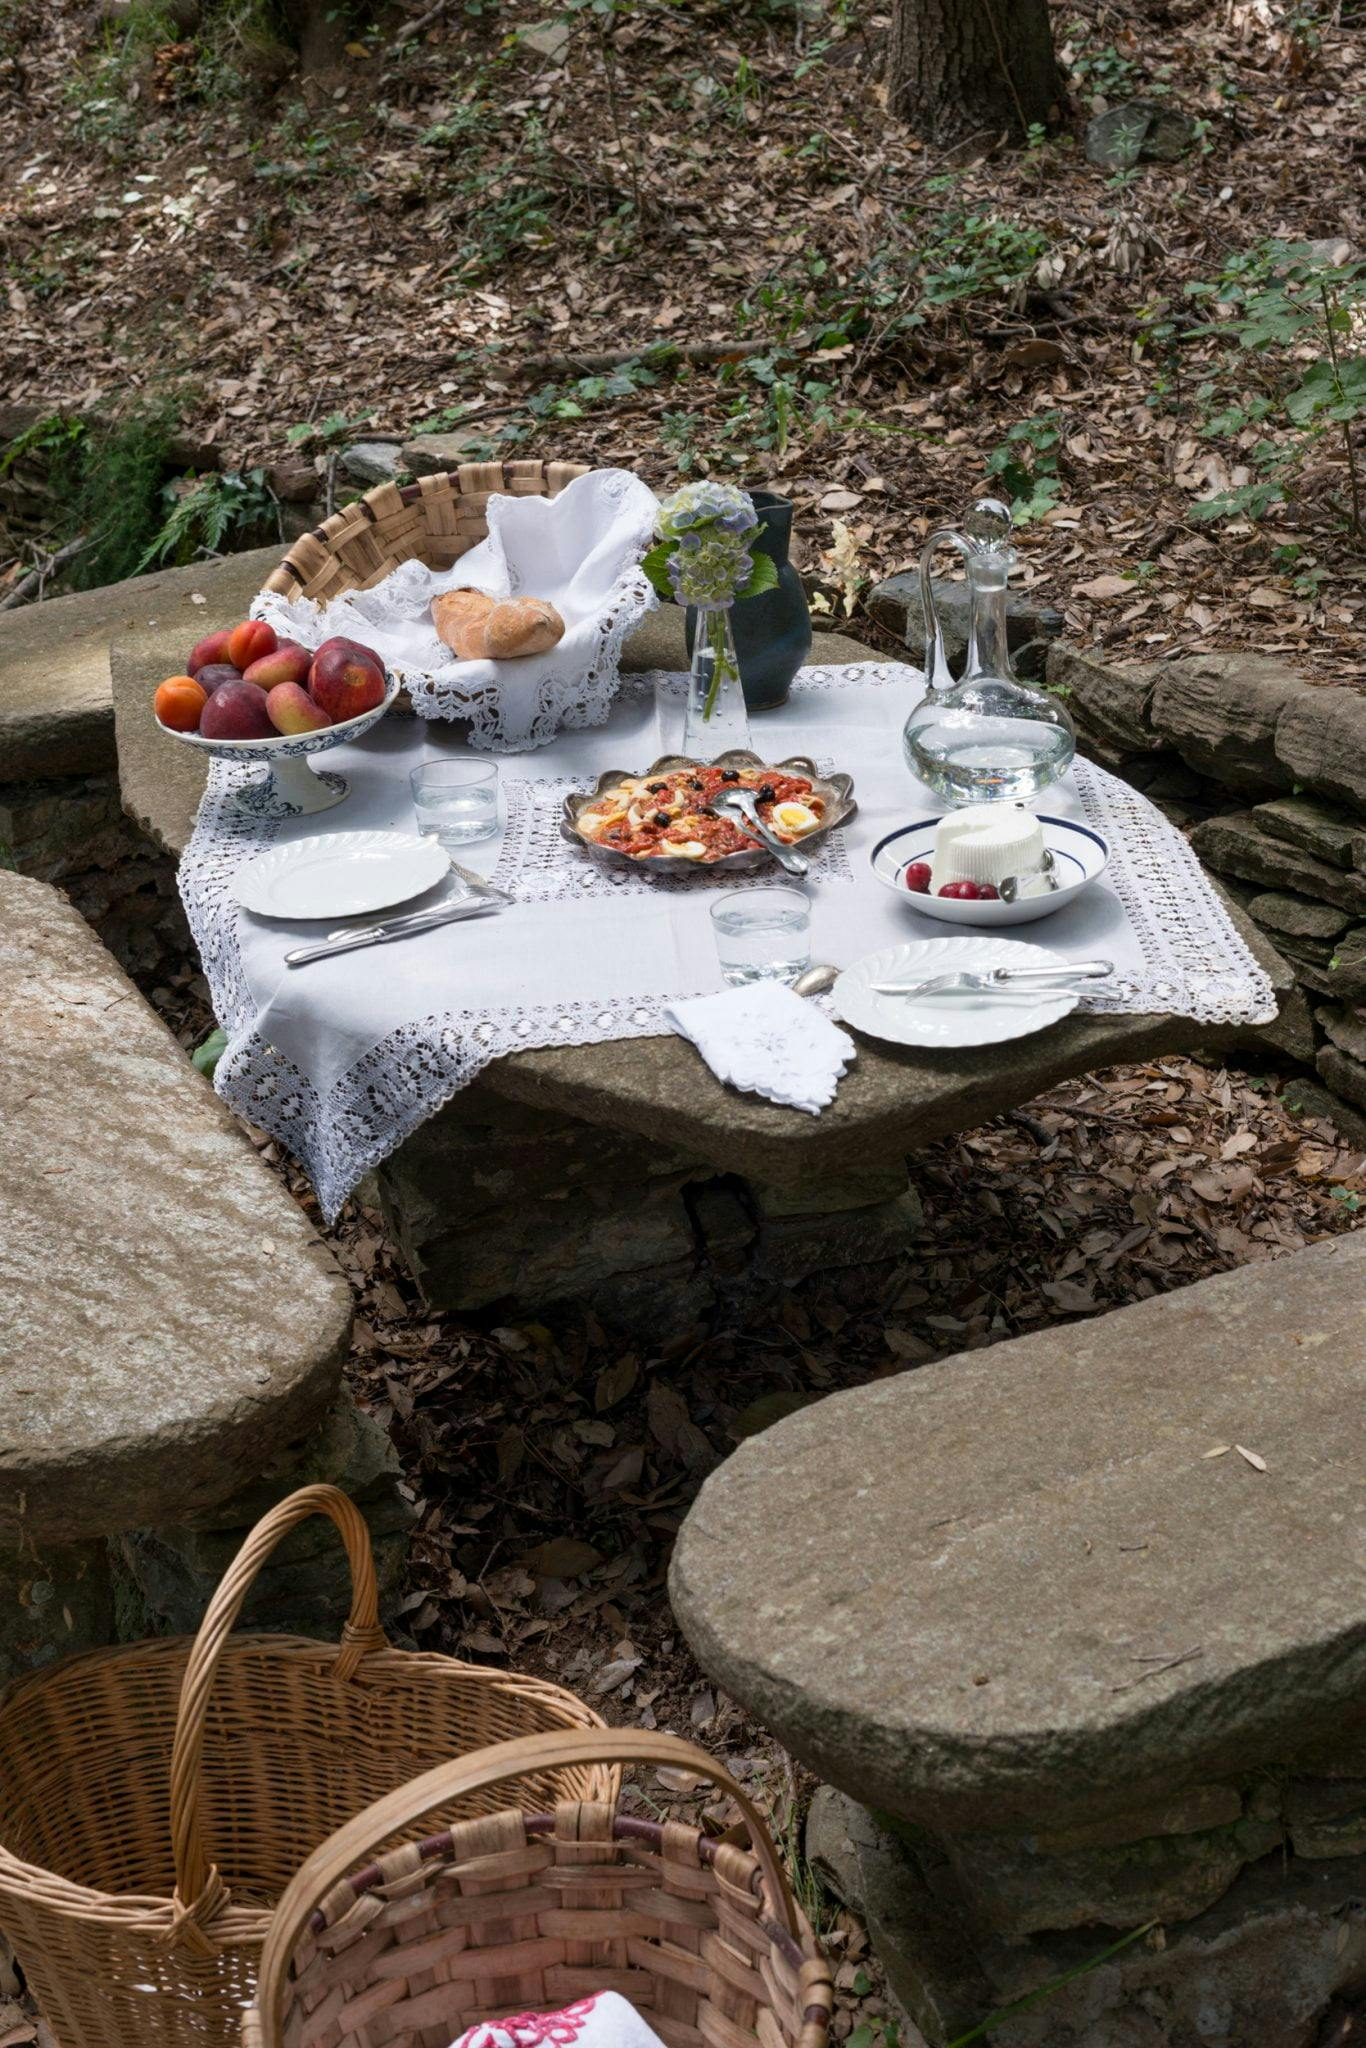 Garden table with tablecloth and dishes